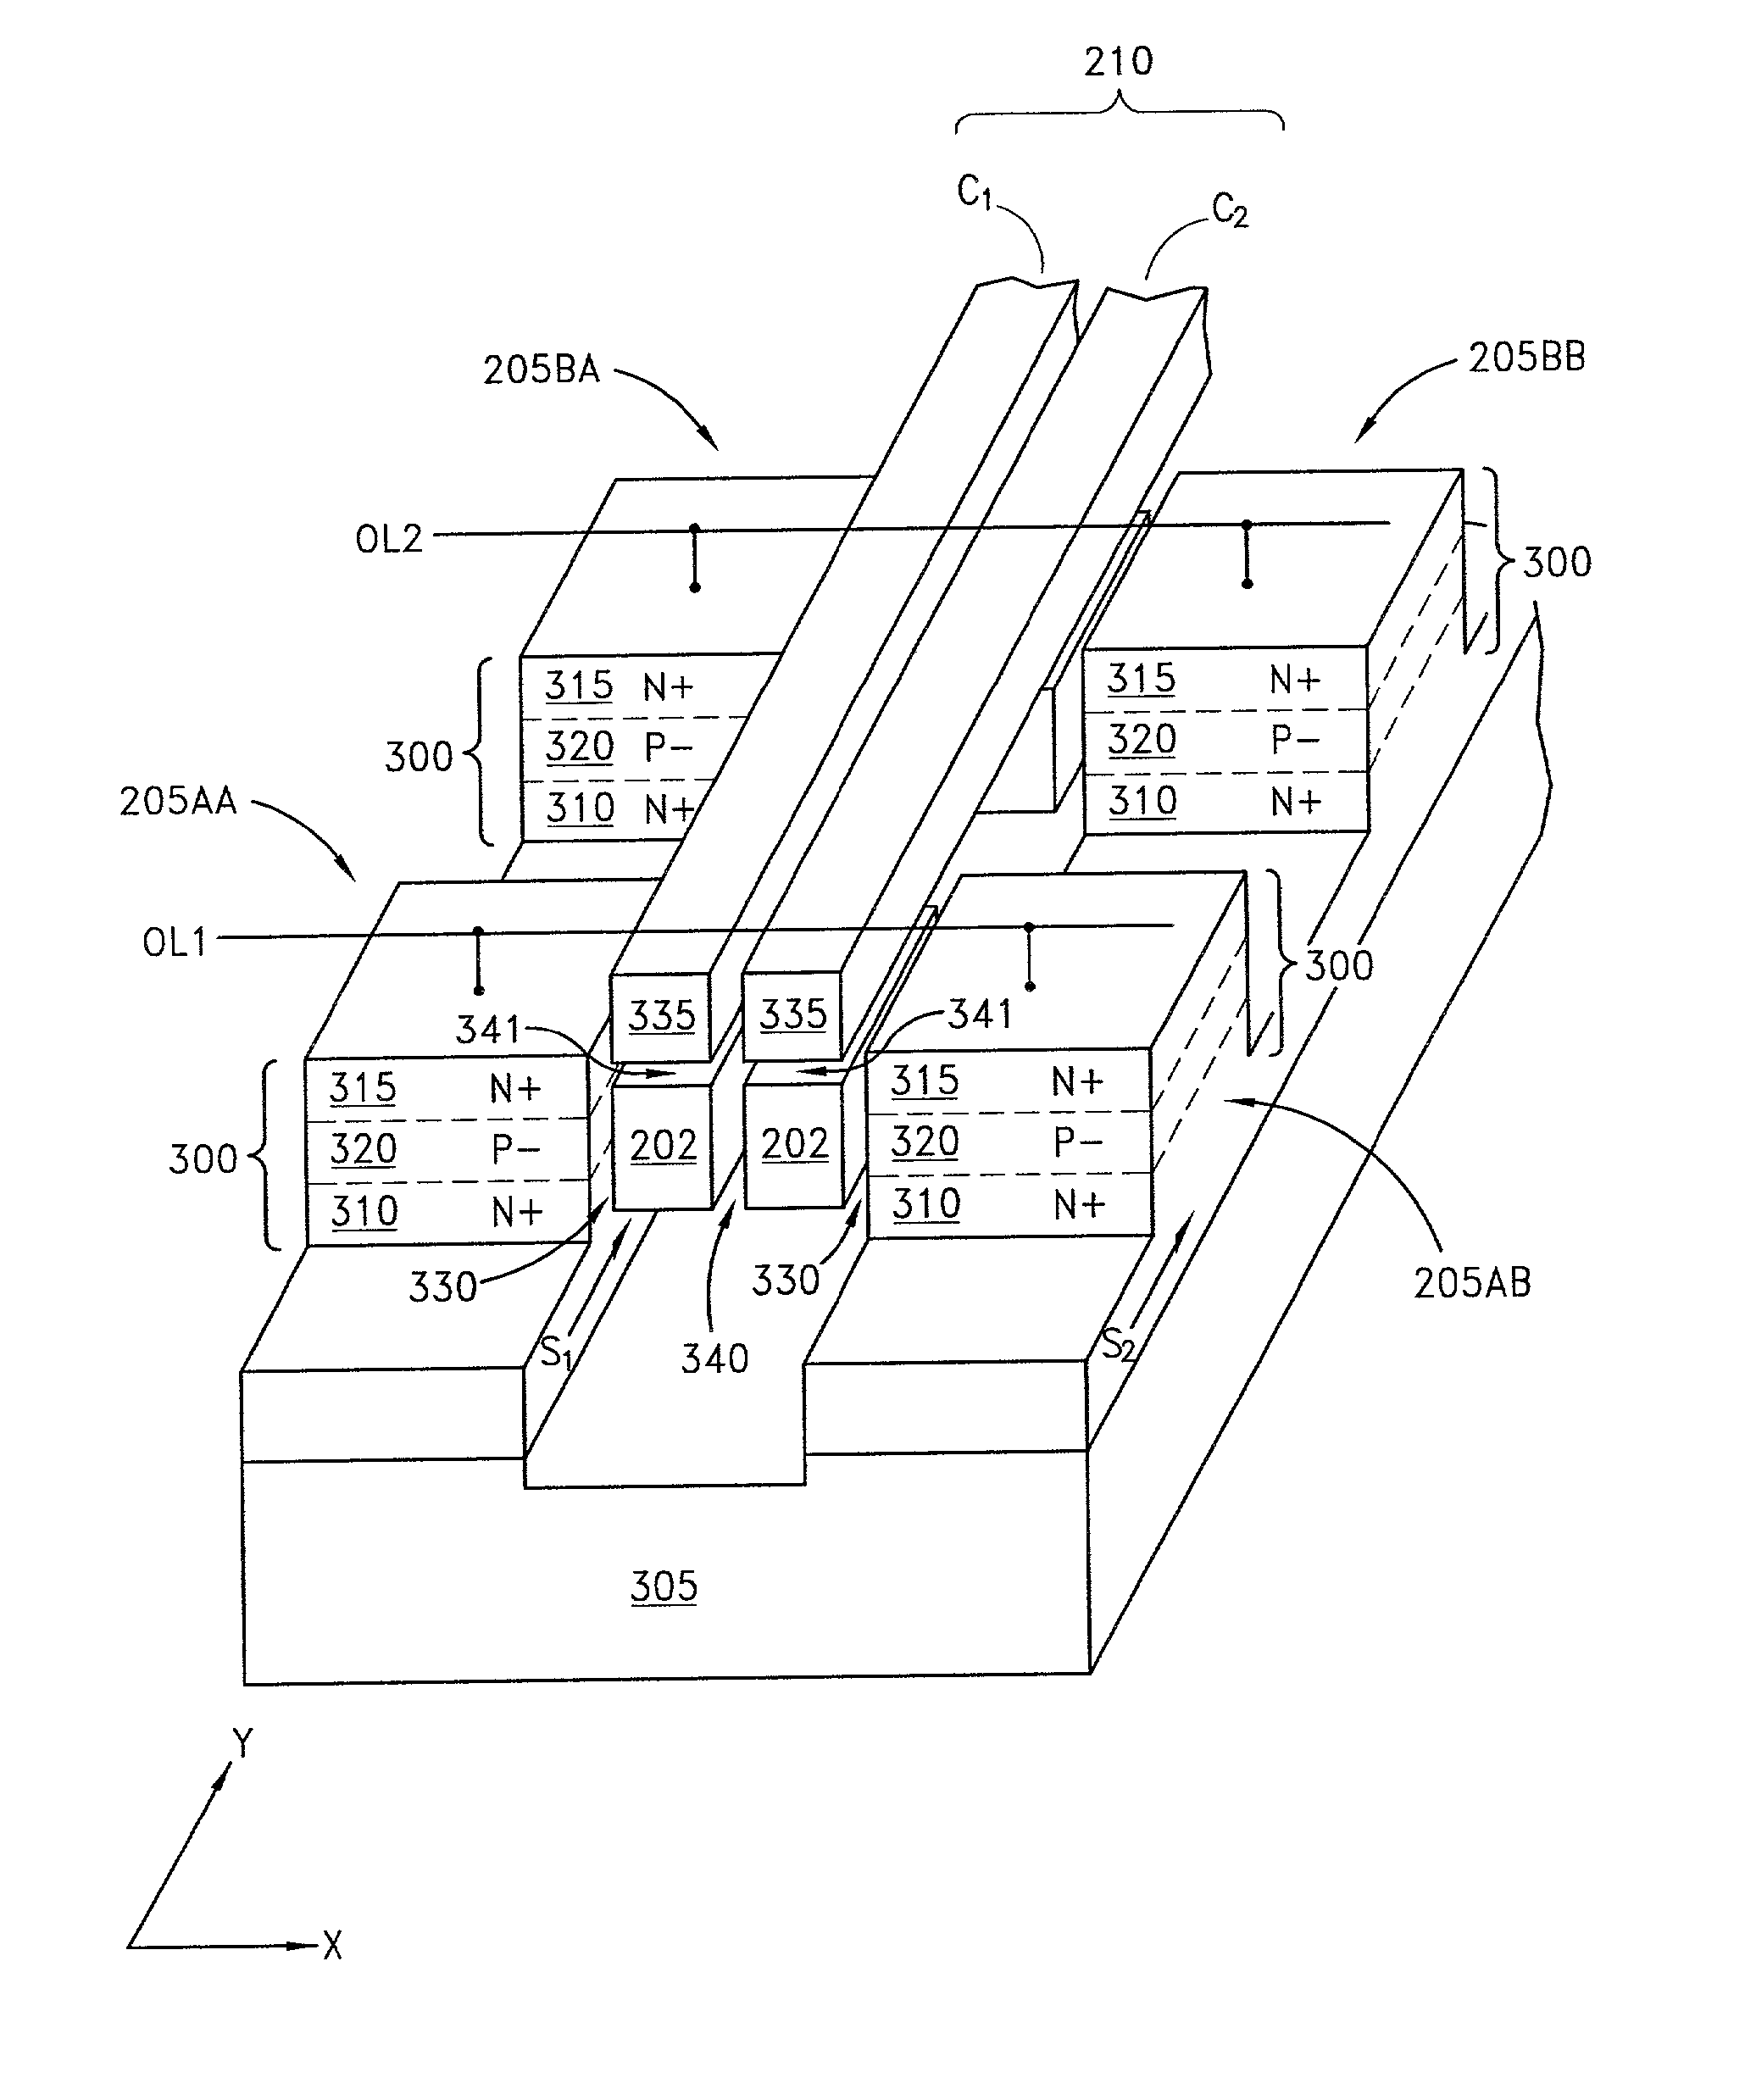 Vertical transistor with horizontal gate layers